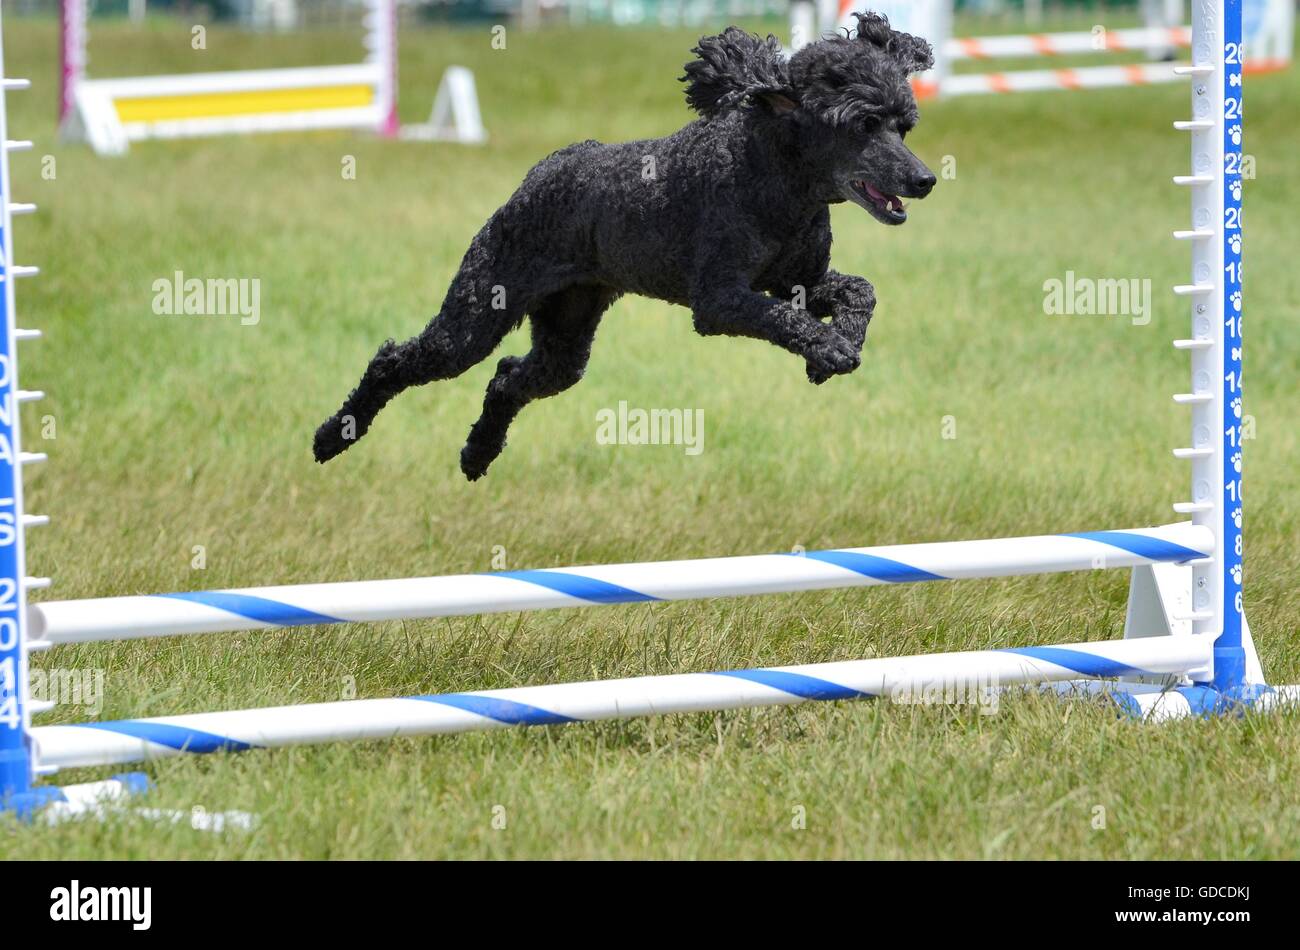 Black Miniature Poodle Running Leaping Over a Jump at an Agility Trial Stock Photo